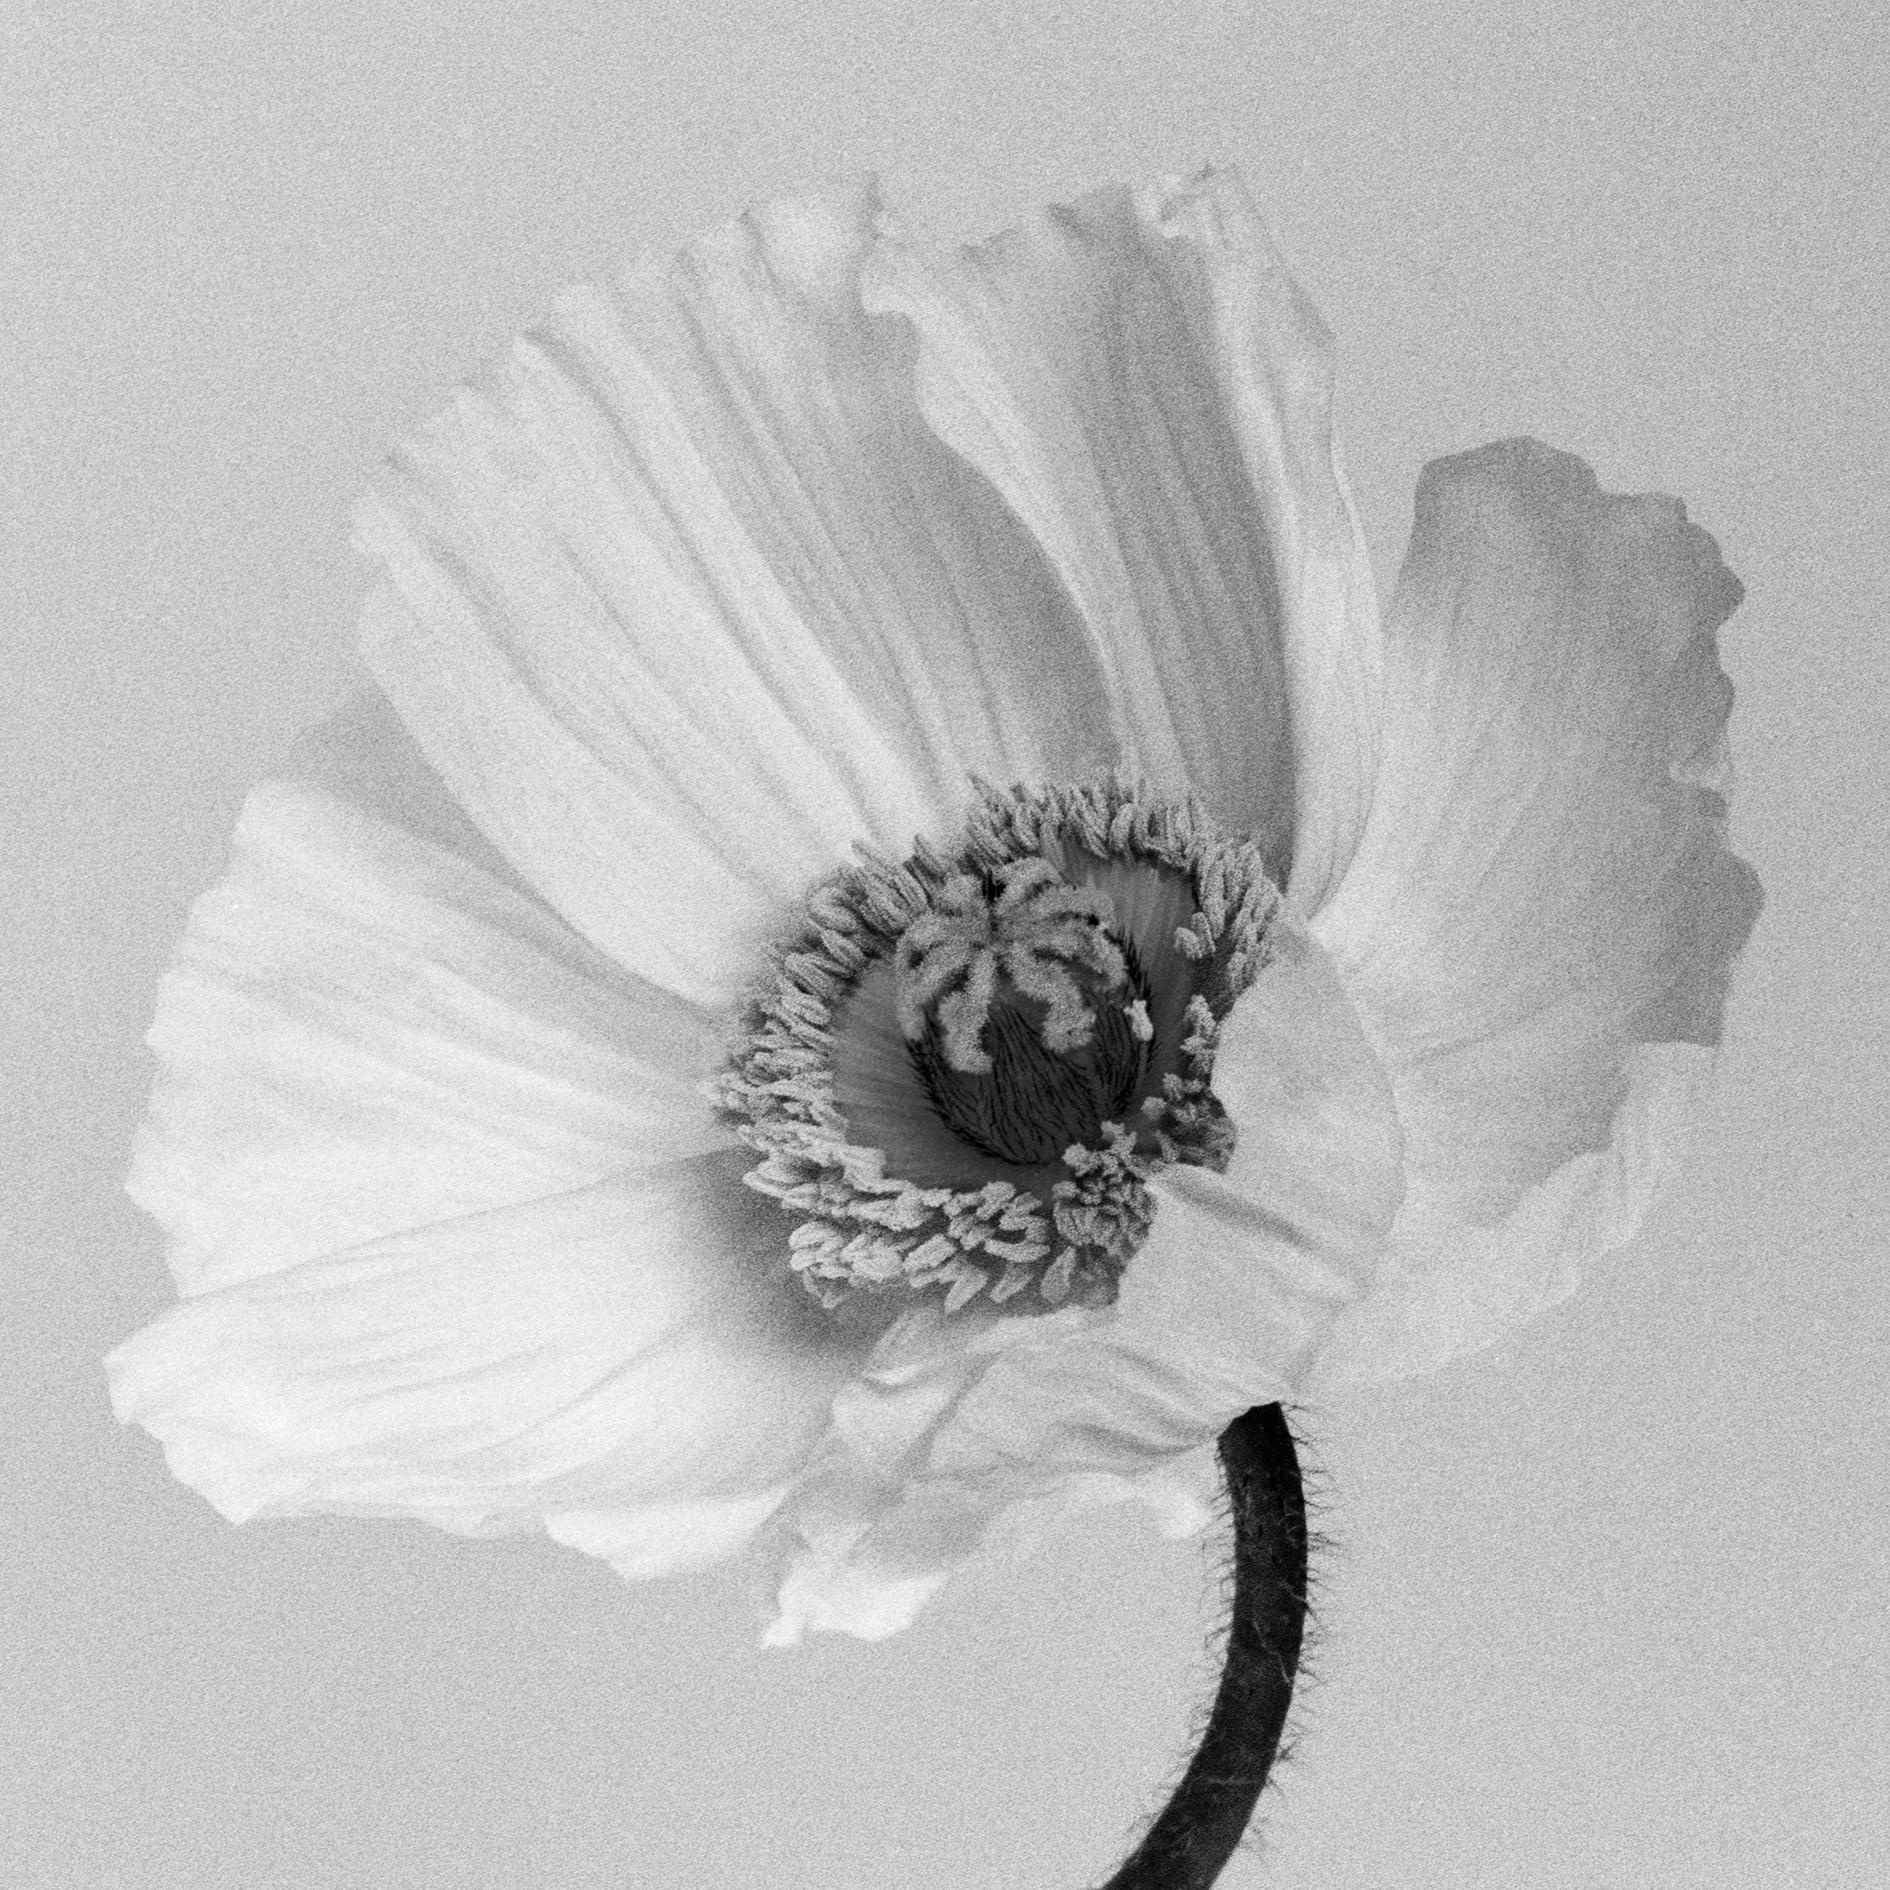 Ugne Pouwell Black and White Photograph - Poppy No.2 - Analogue black and white floral photography, edition of 10